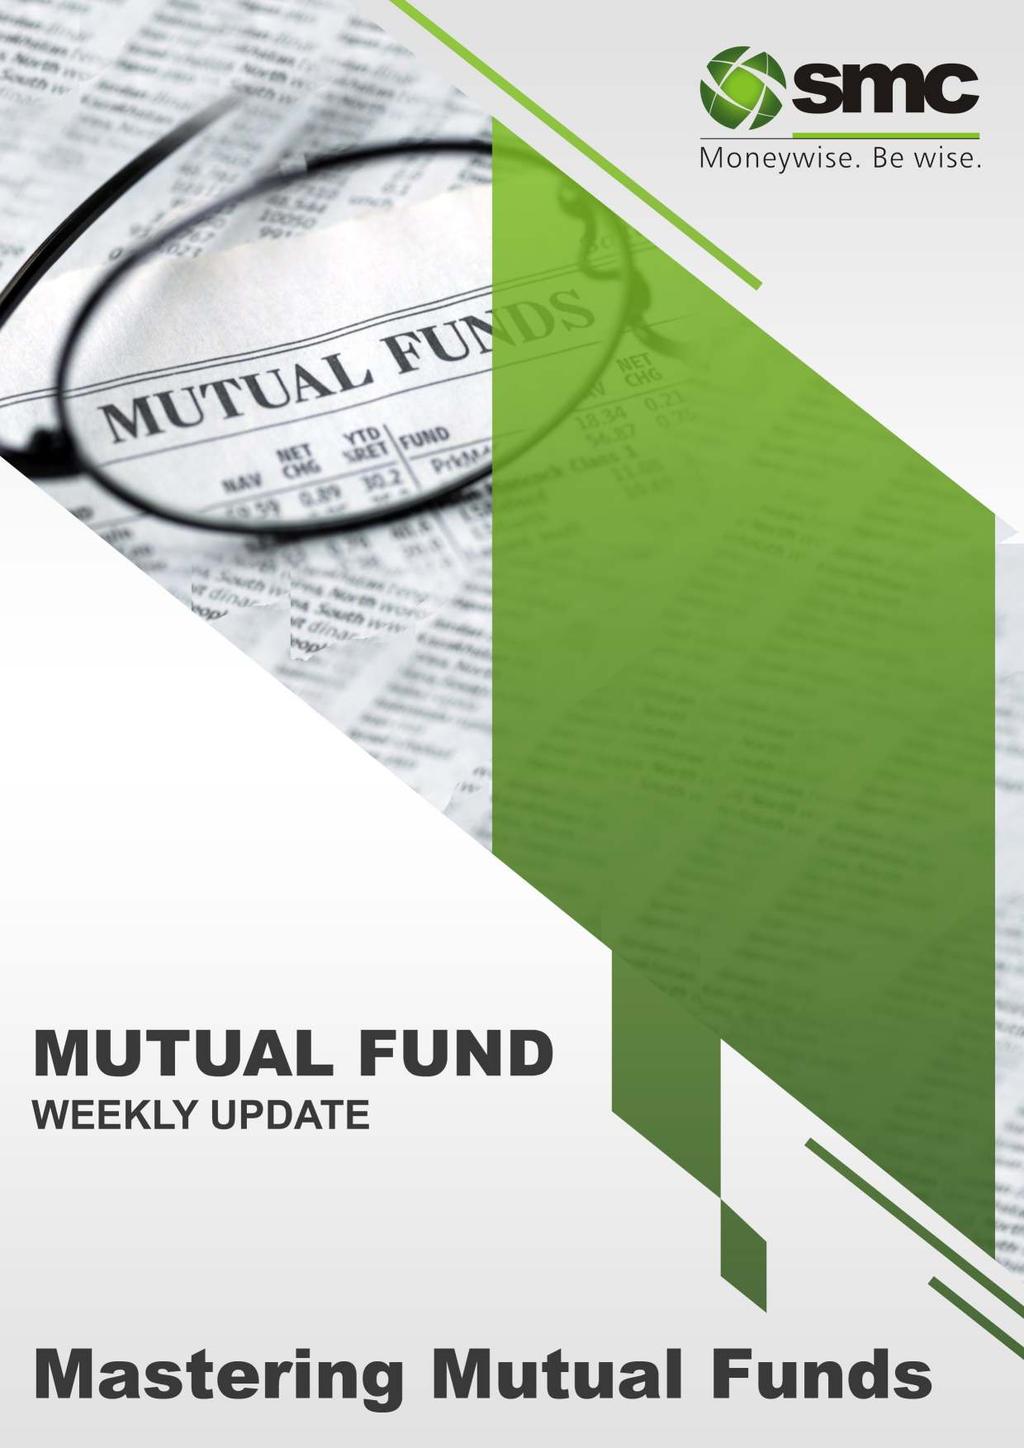 CONTENTS Industry & Fund Update 2 Dividend Declared 3 New Fund Offers 4 Performance of Equity Funds 5